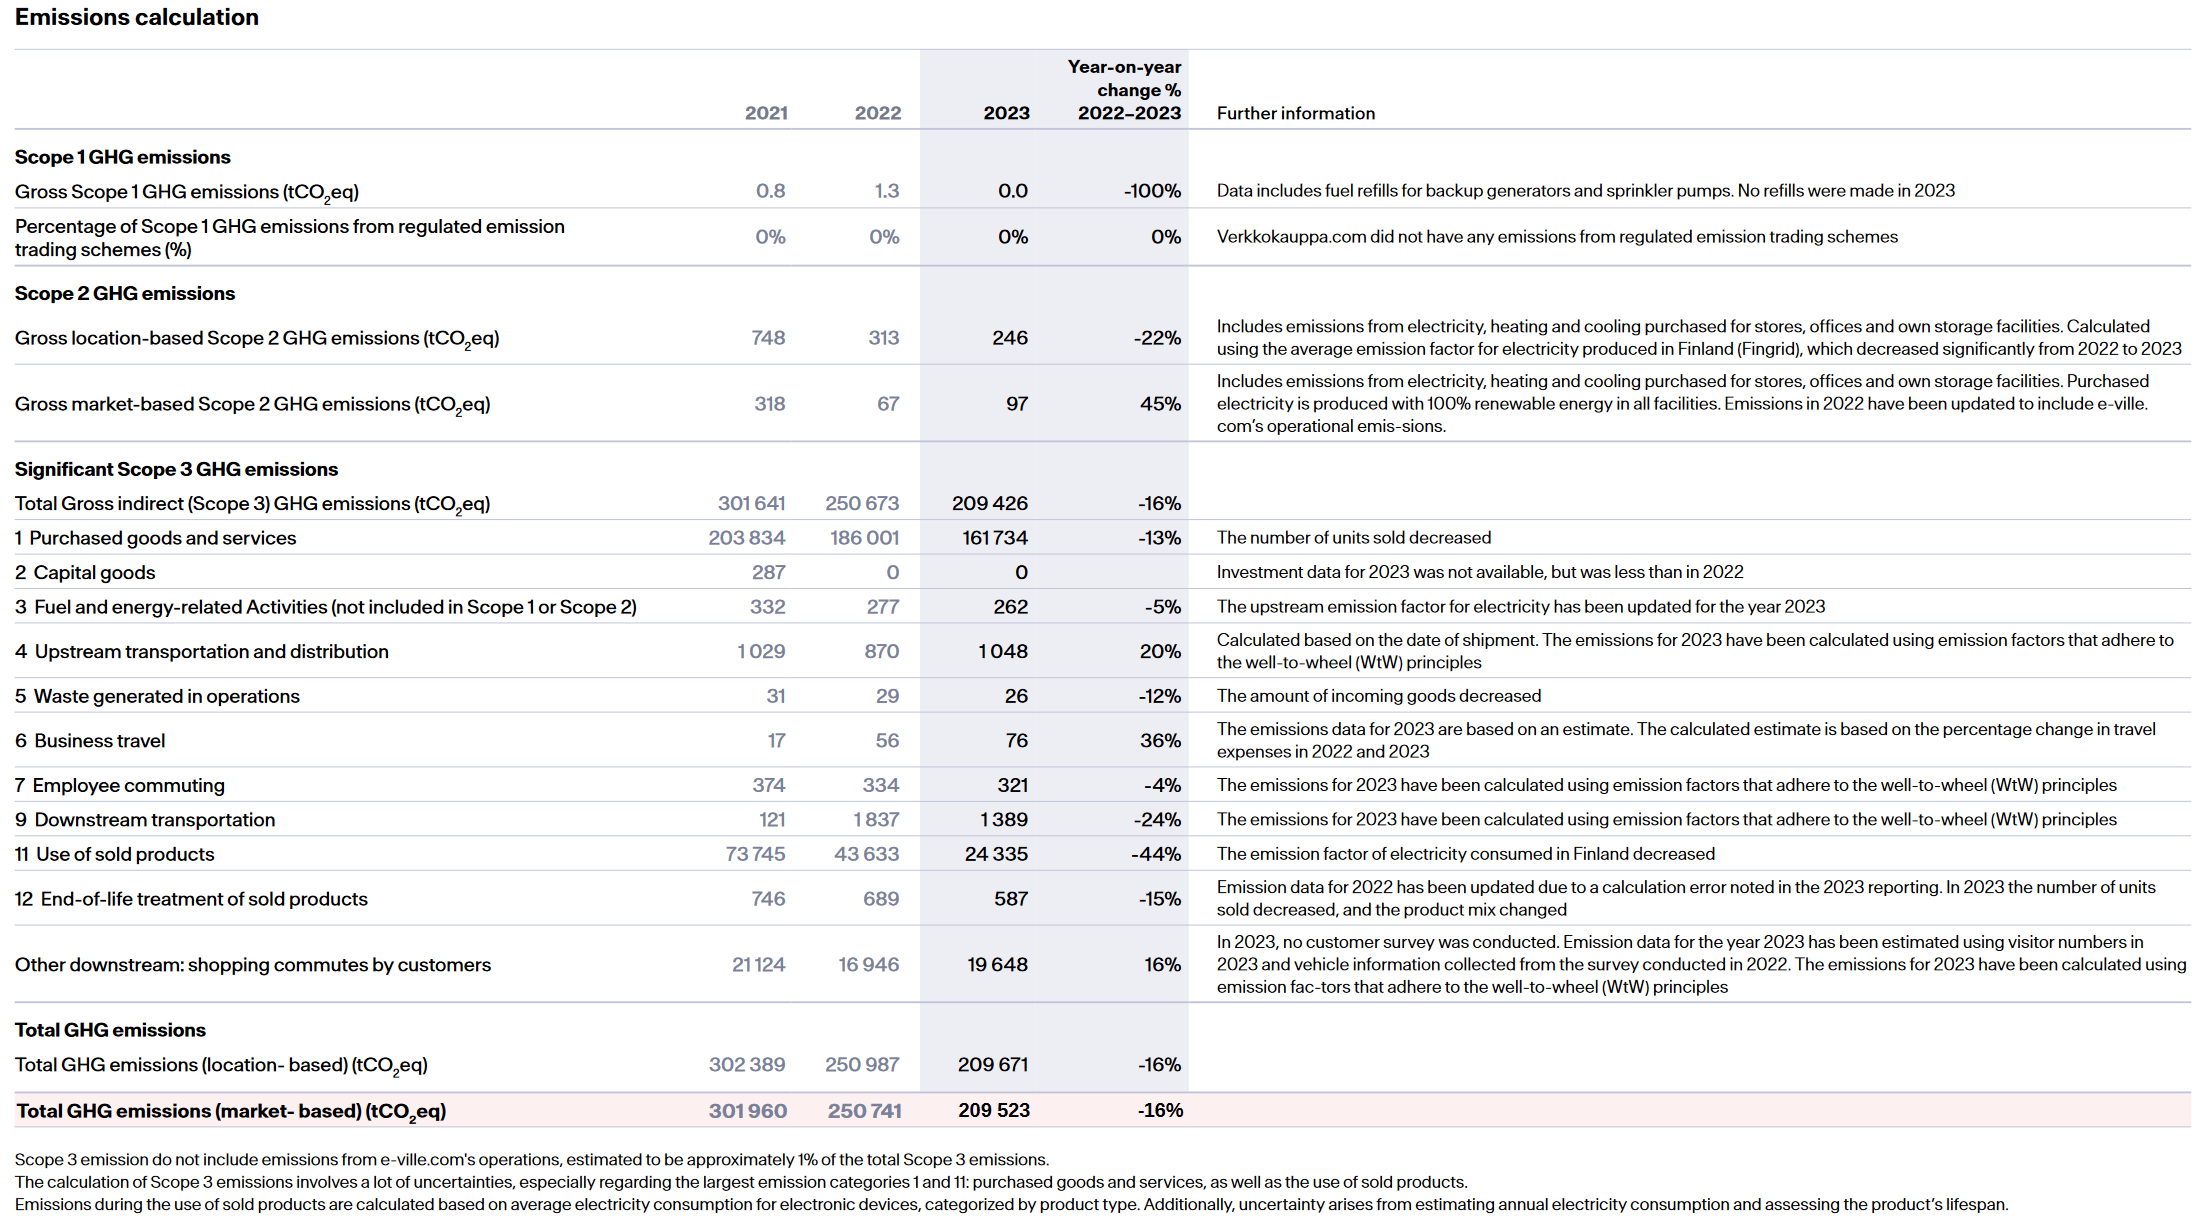 Table of greenhouse gas emissions from own operations (scope 1 & scope 2)